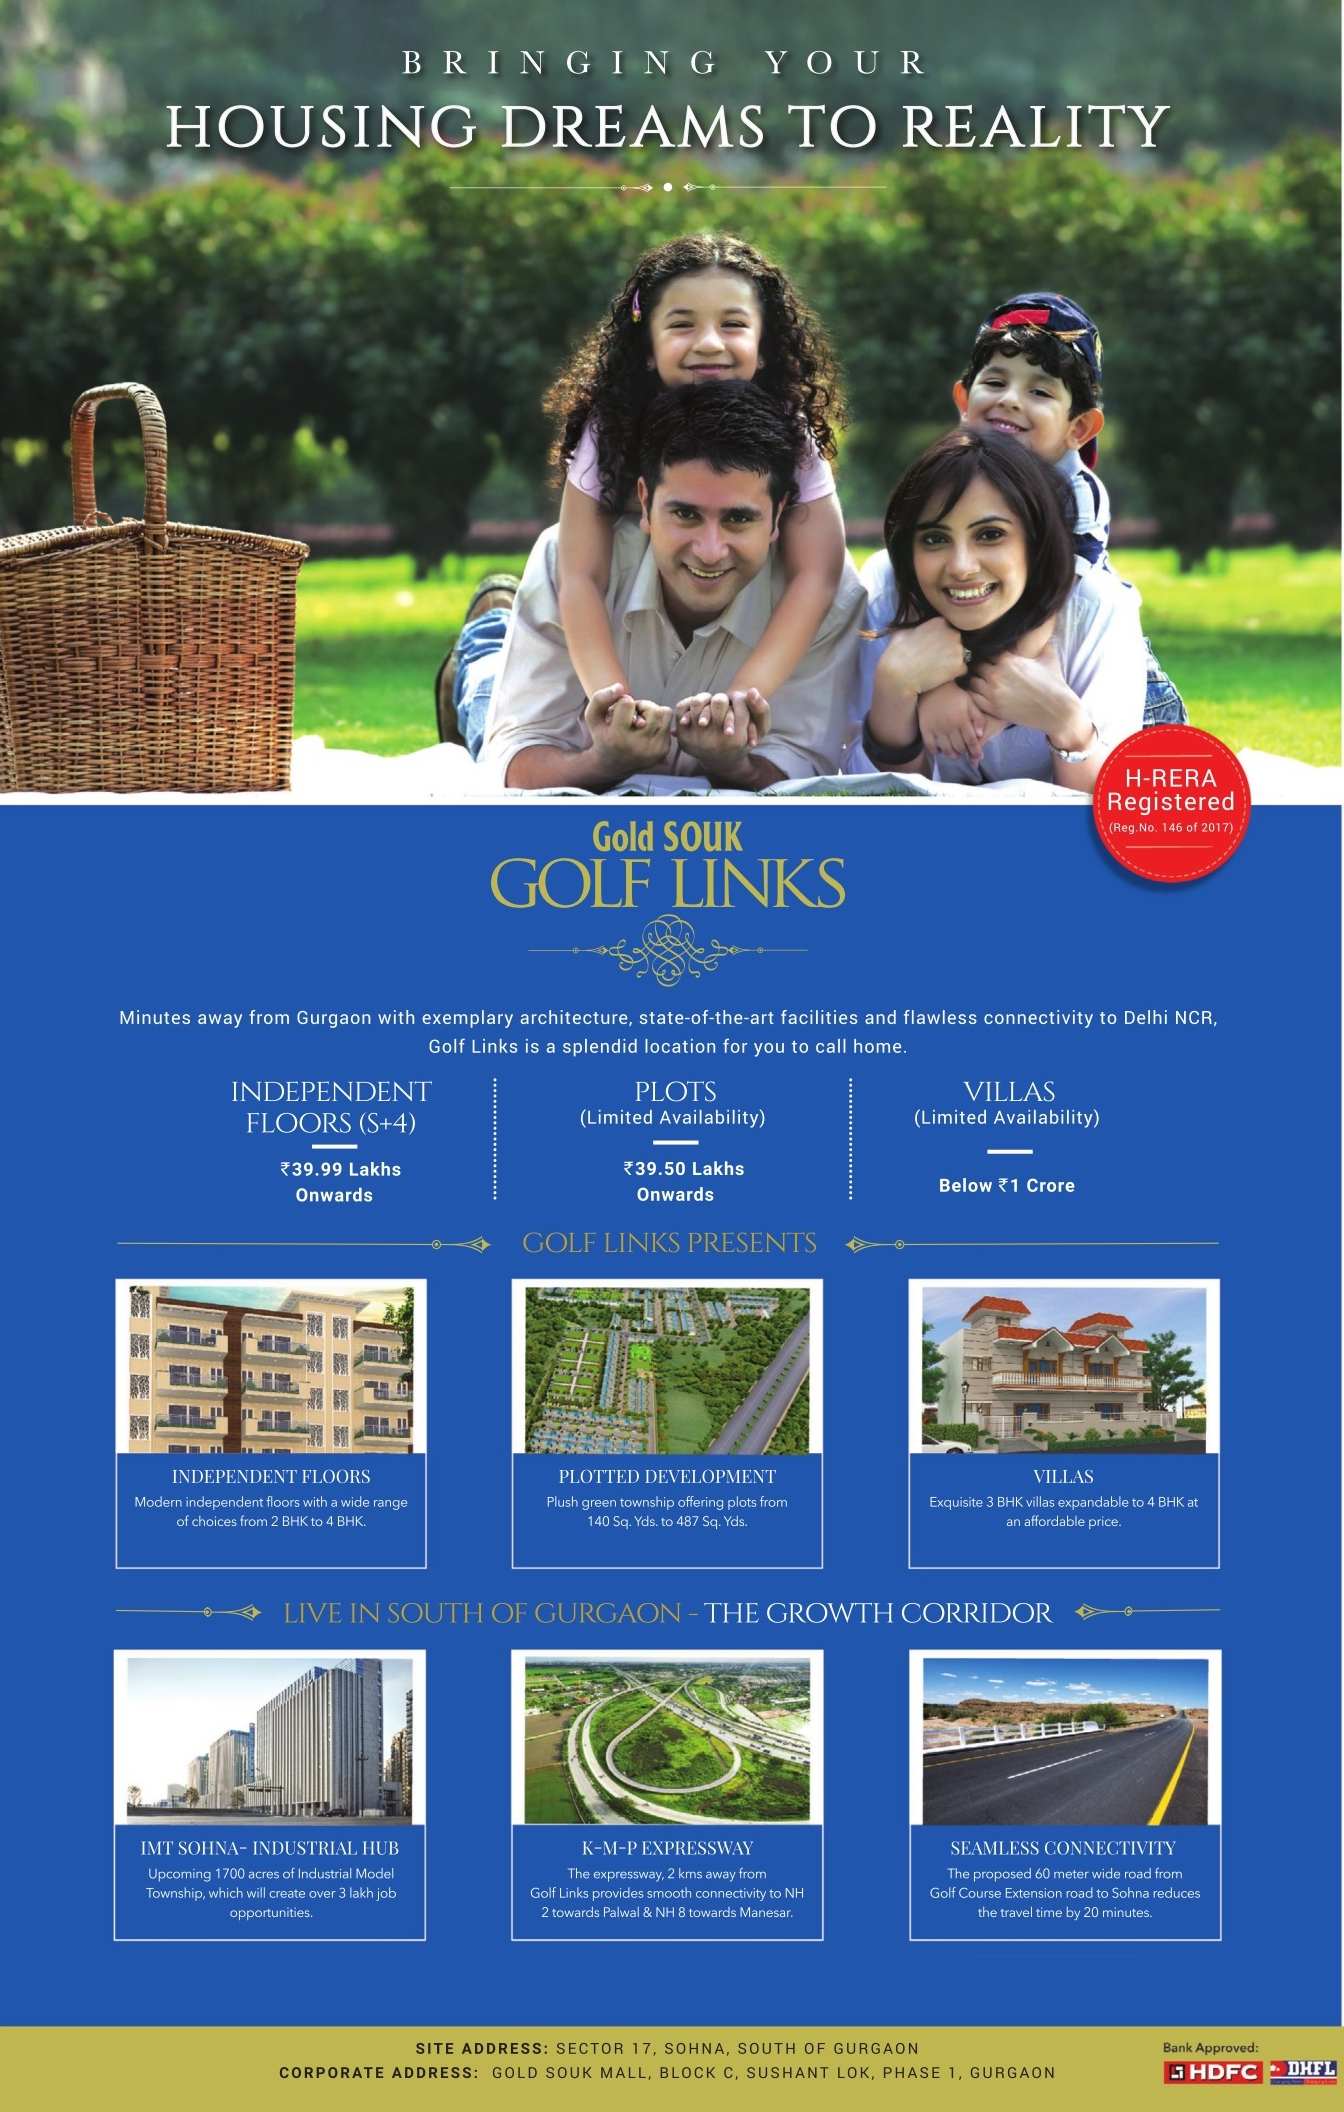 Bring your Housing Dreams to Reality at Gold Souk Golf Links in Sohna